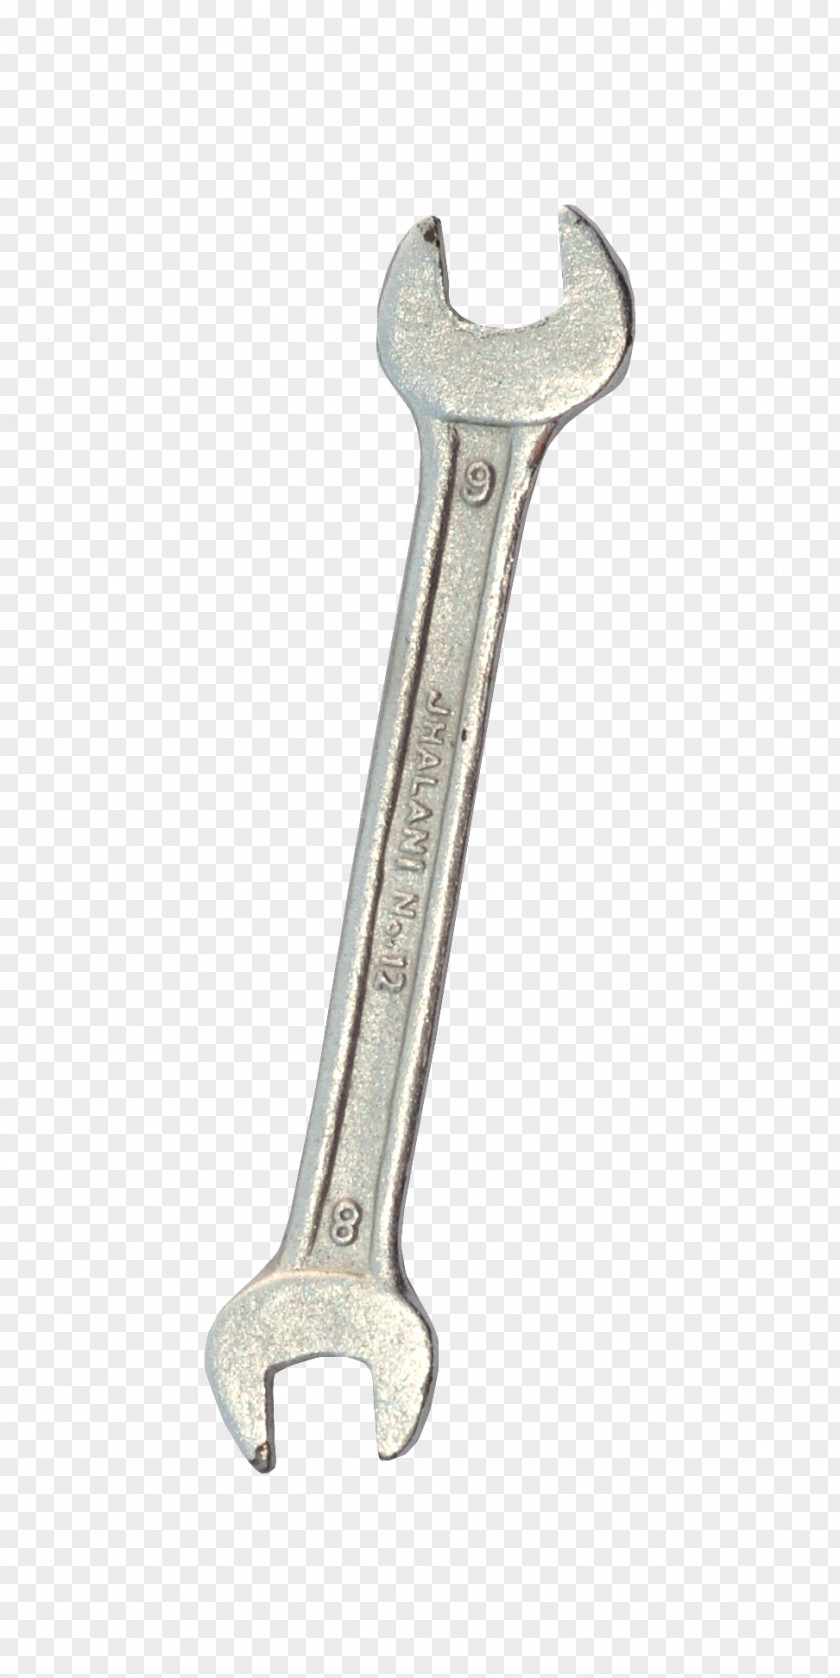 Metal Wrench Material Free To Pull Adjustable Spanner PNG